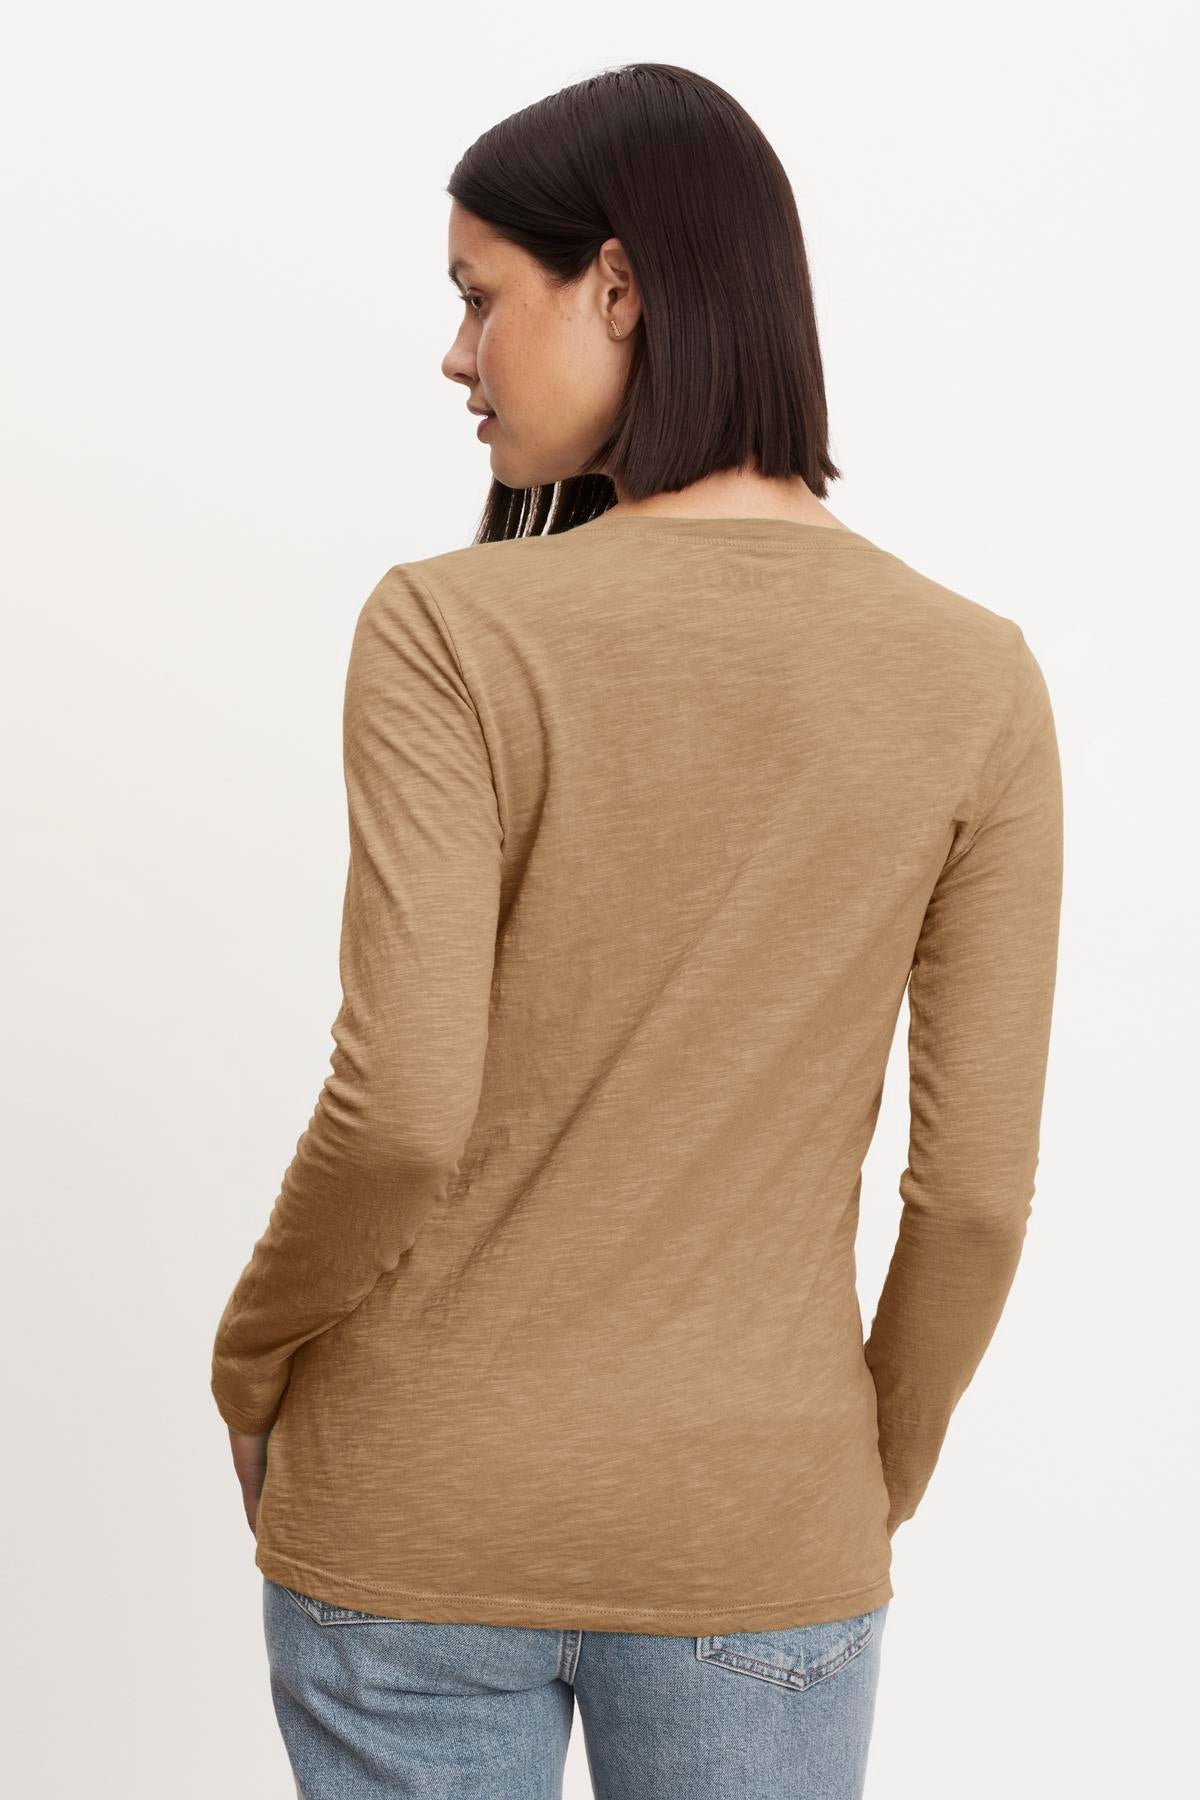 The back view of a woman wearing a Velvet by Graham & Spencer BLAIRE ORIGINAL SLUB TEE.-35782759121089